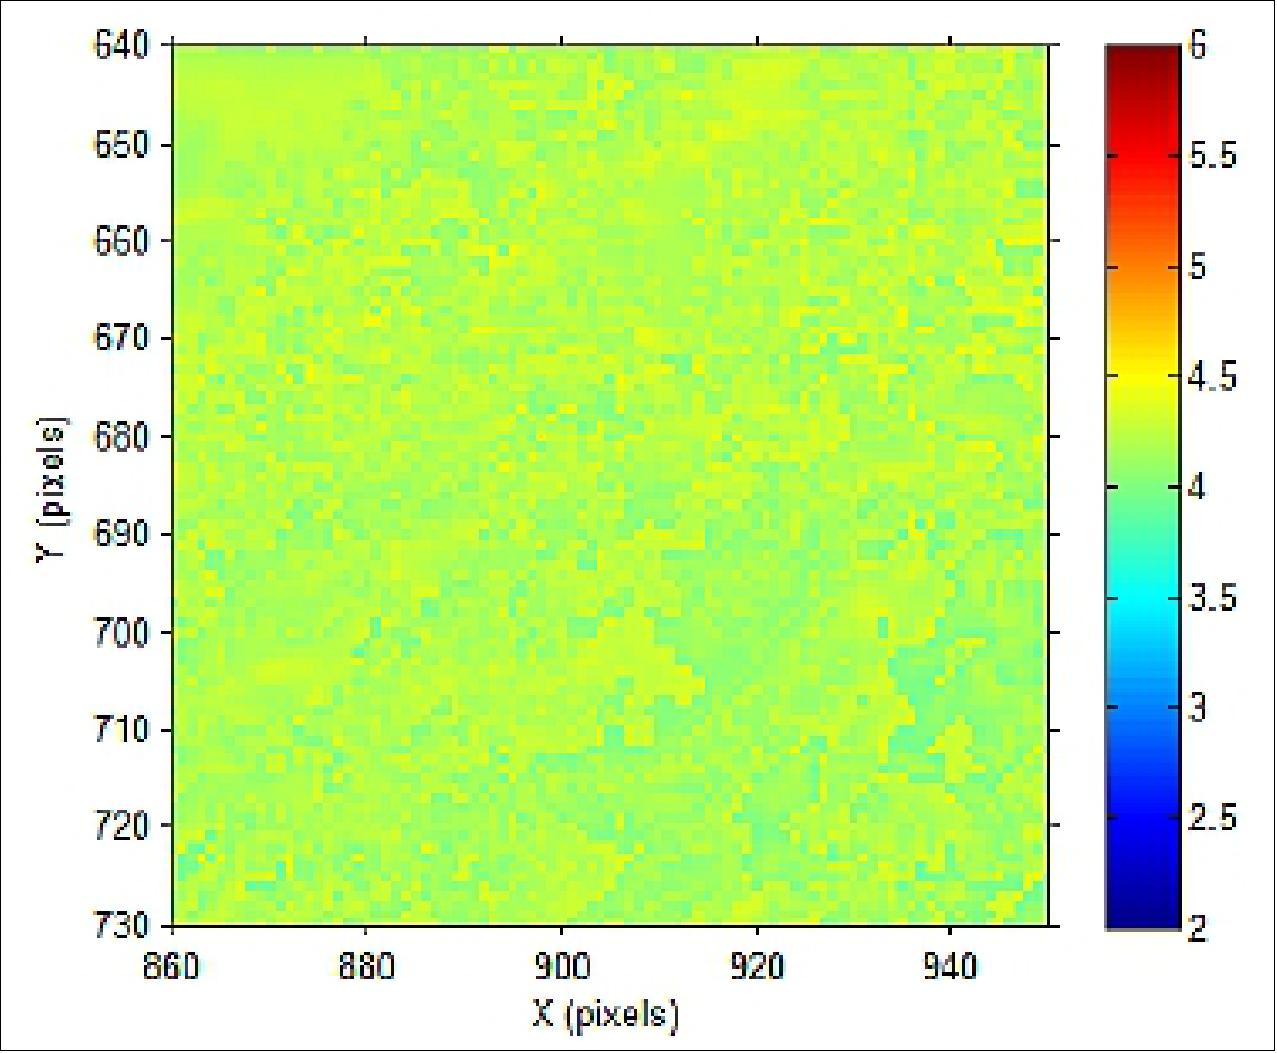 Figure 63: Threshold-to-noise ratio when detection threshold is selected on a pixel-by-pixel basis (image credit: Lockheed Martin STAR Labs)